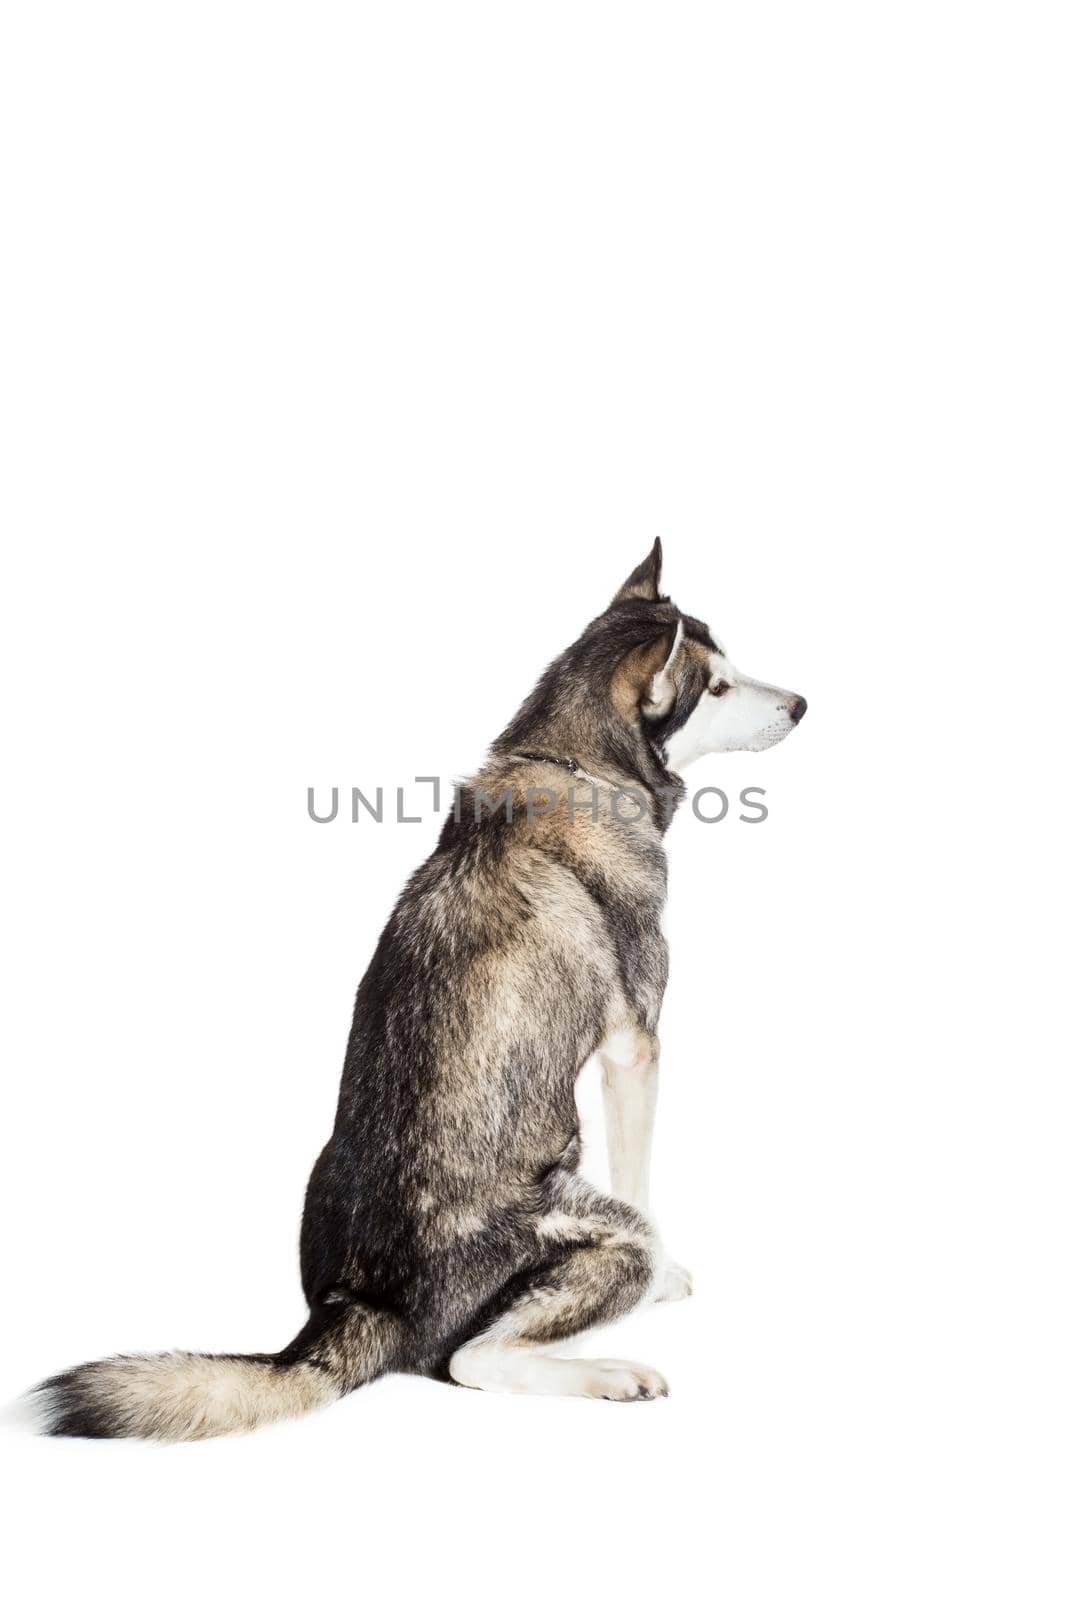 Alaskan Malamute sitting in front of white background. Dog sitting with his back to the camera